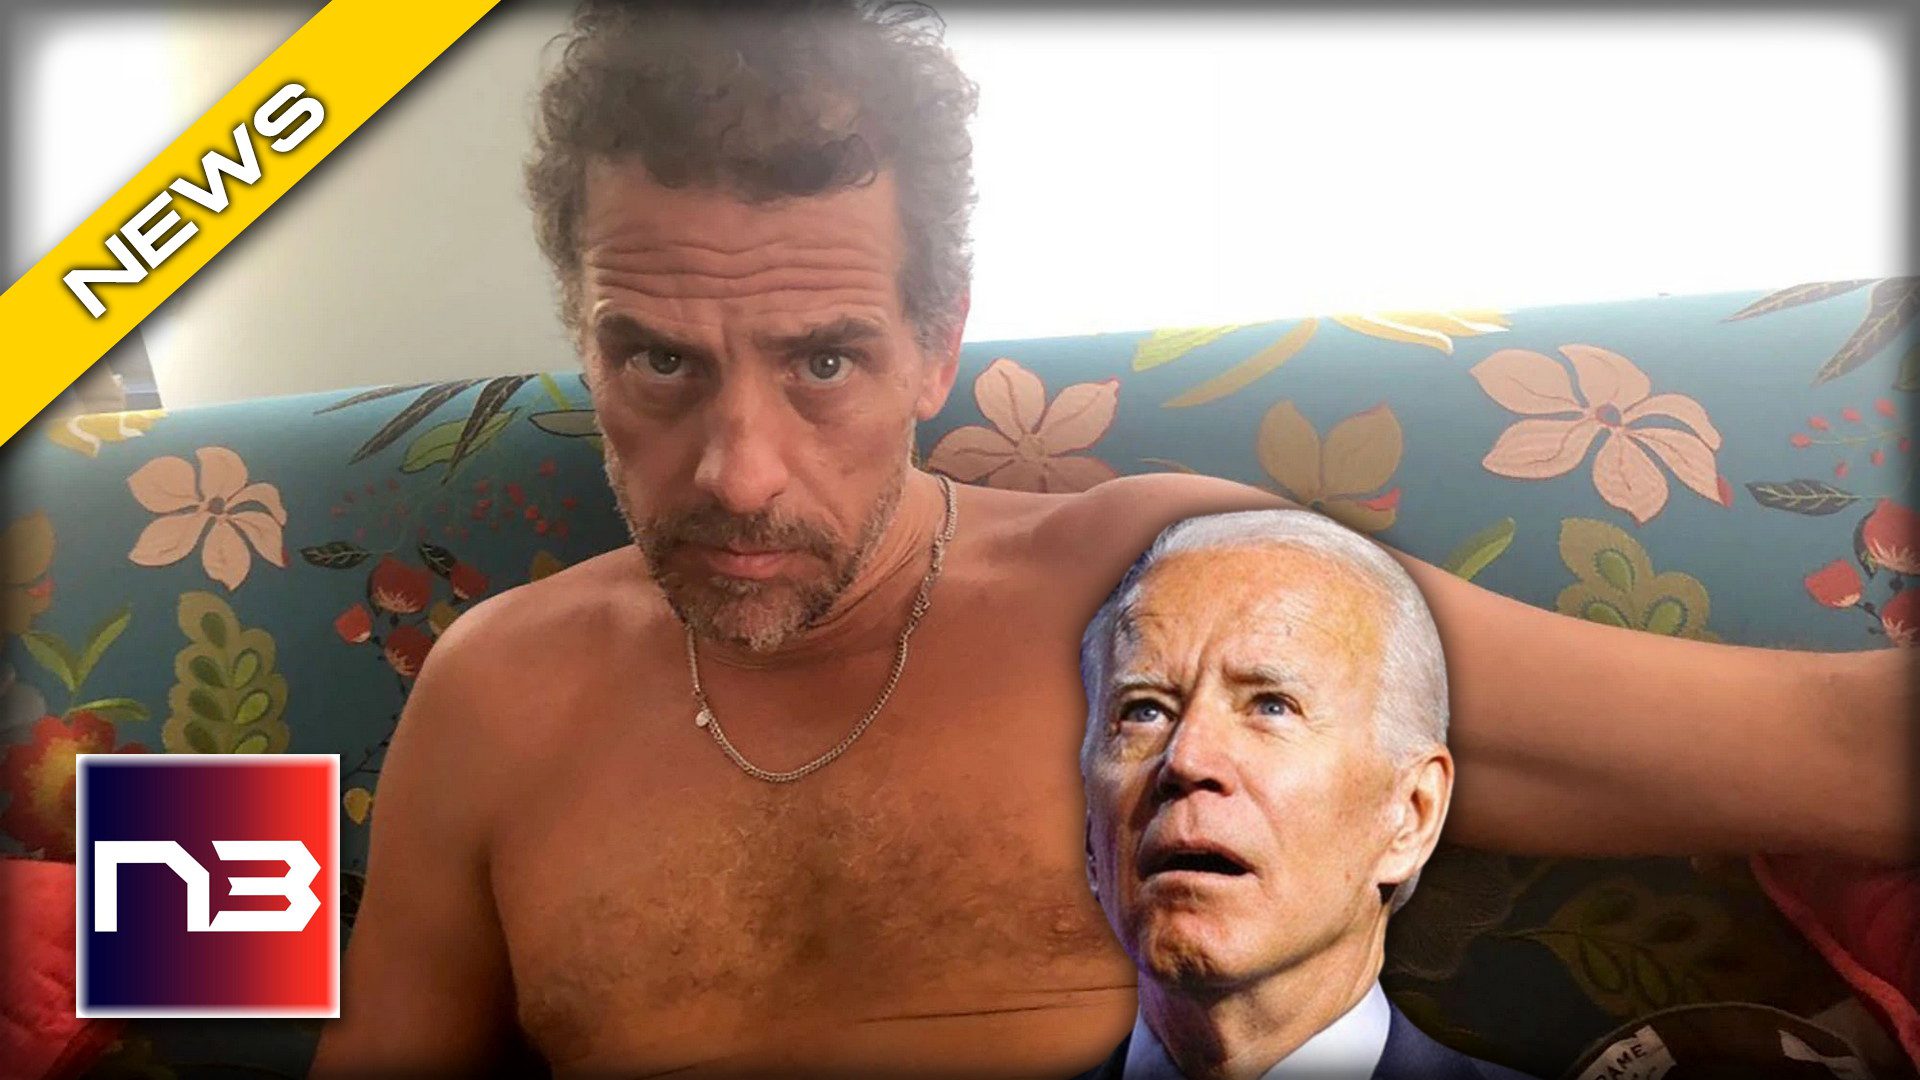 Hunter biden looks up from his laptop while naked.